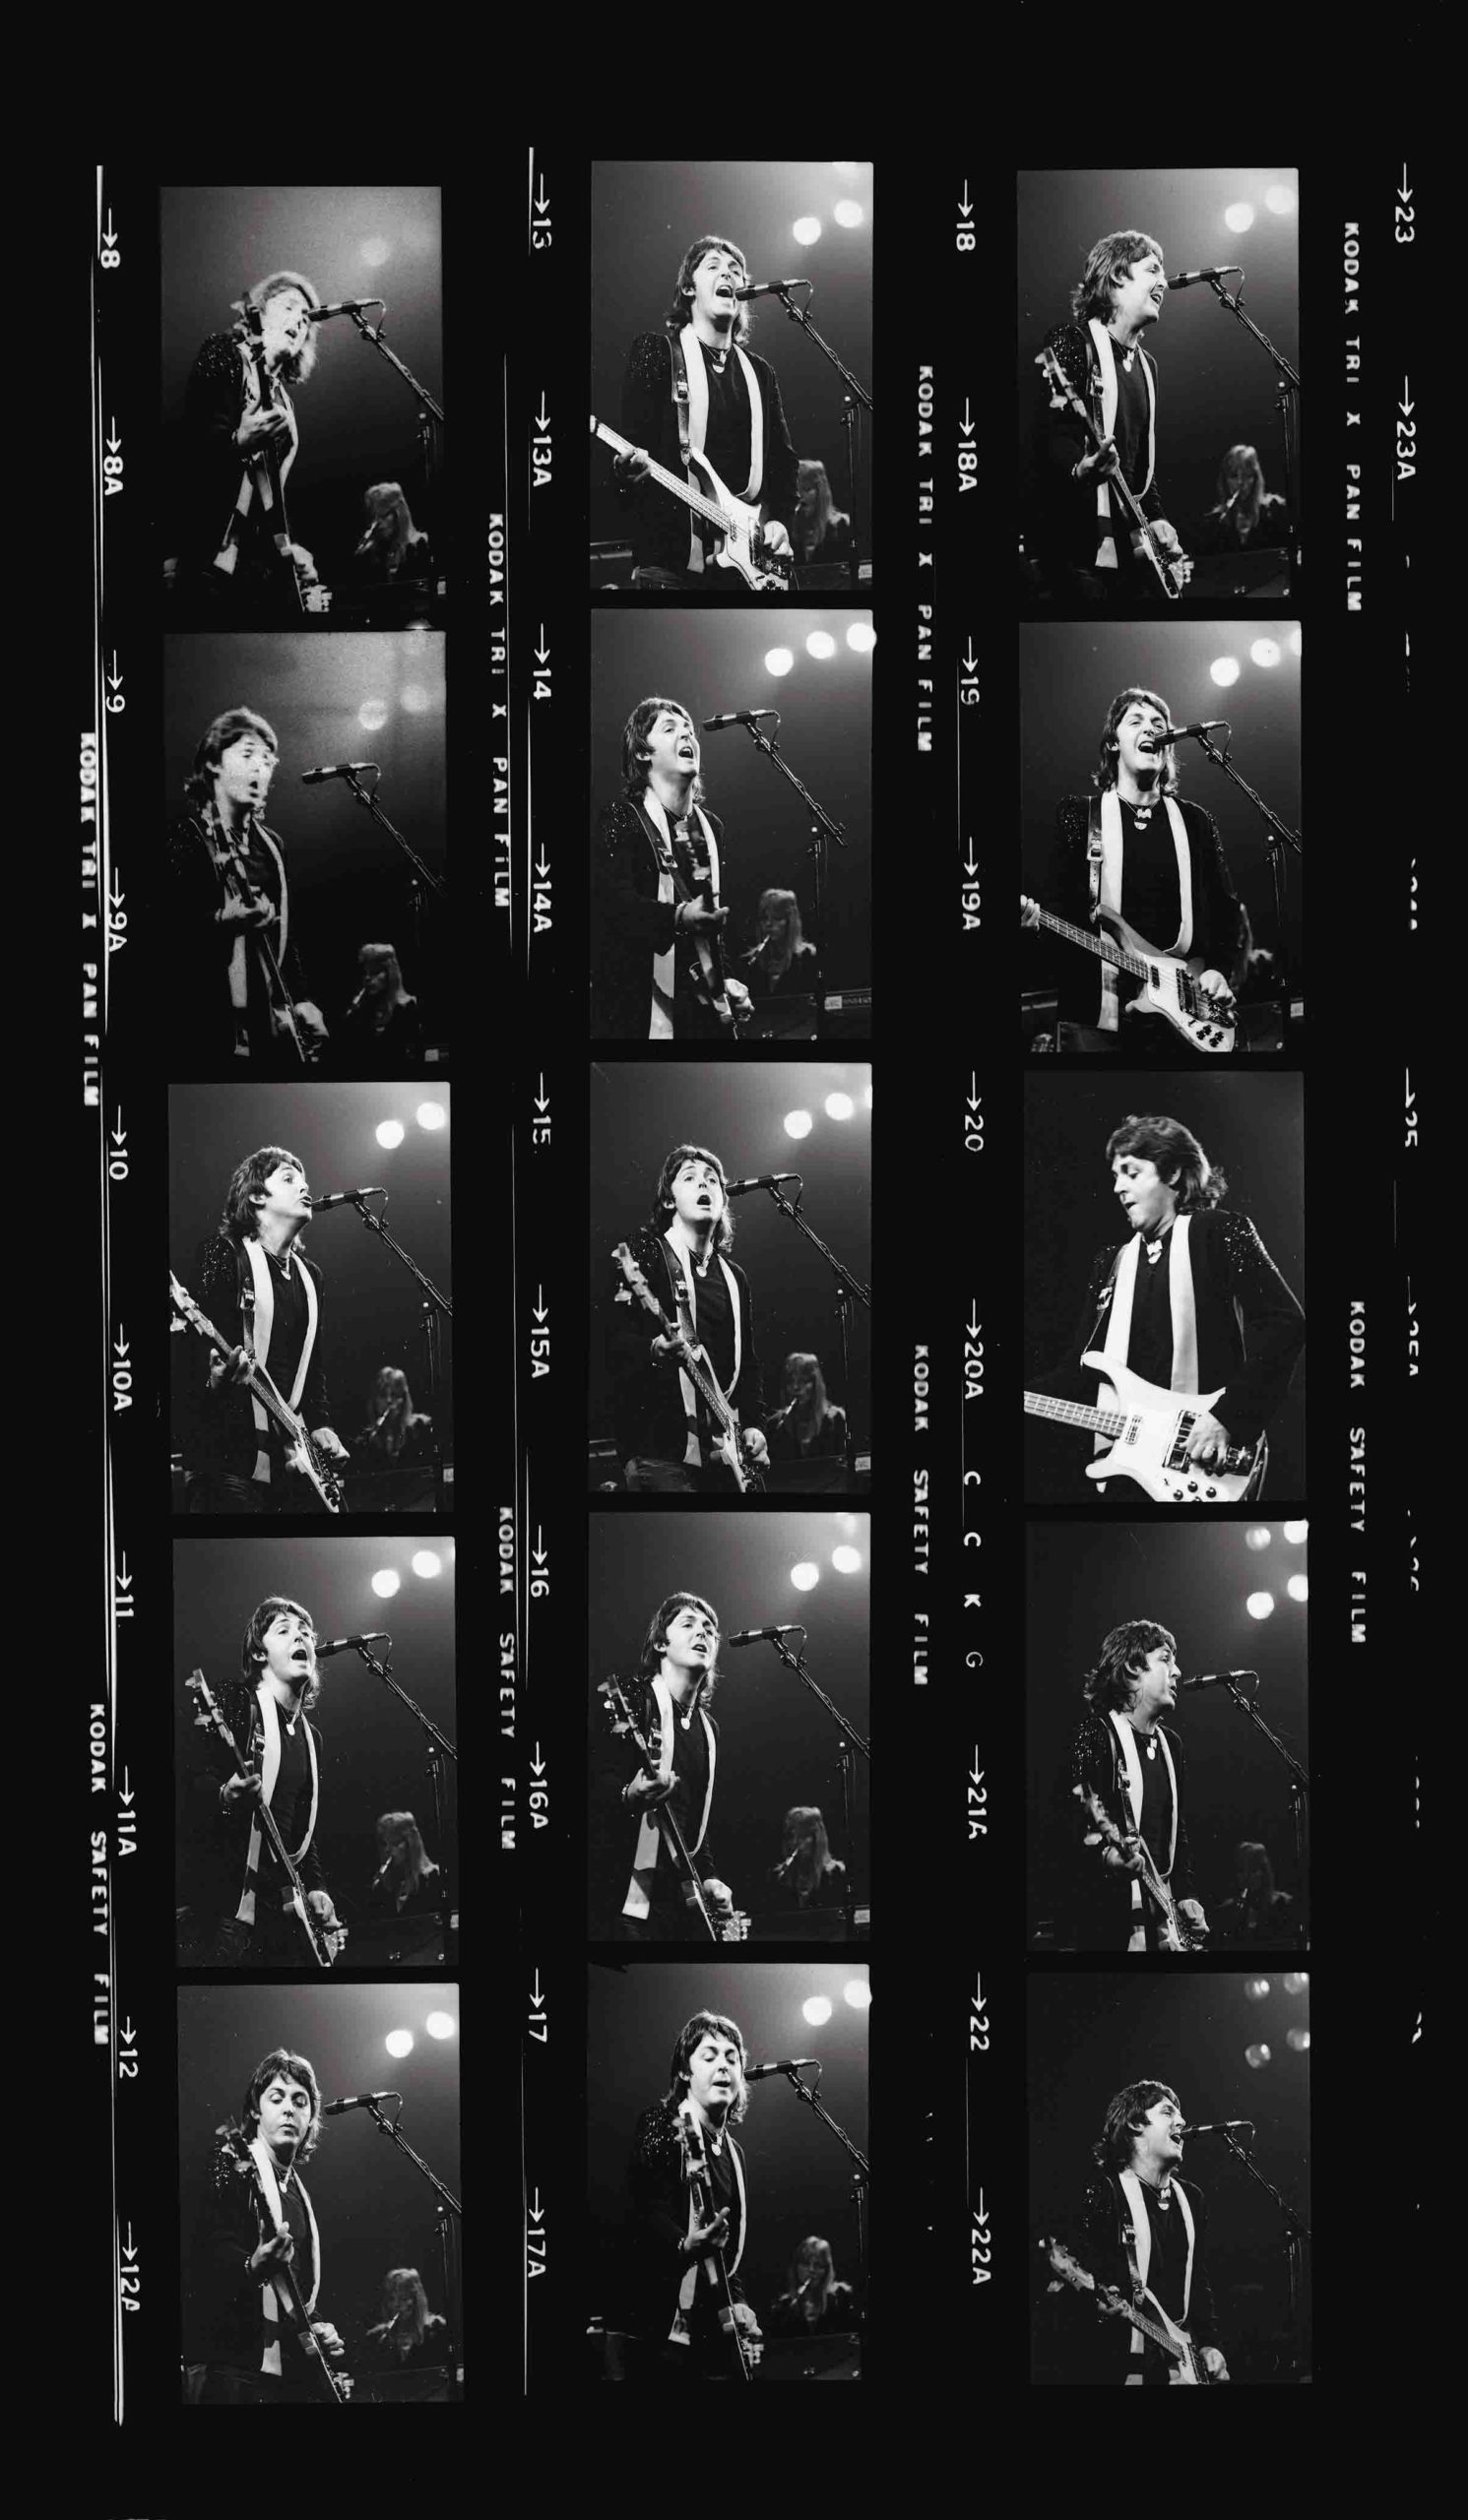  Contact sheet of an animated Paul on stage during a Wings Over America performance. USA, 1976. Credit: Harry Benson.